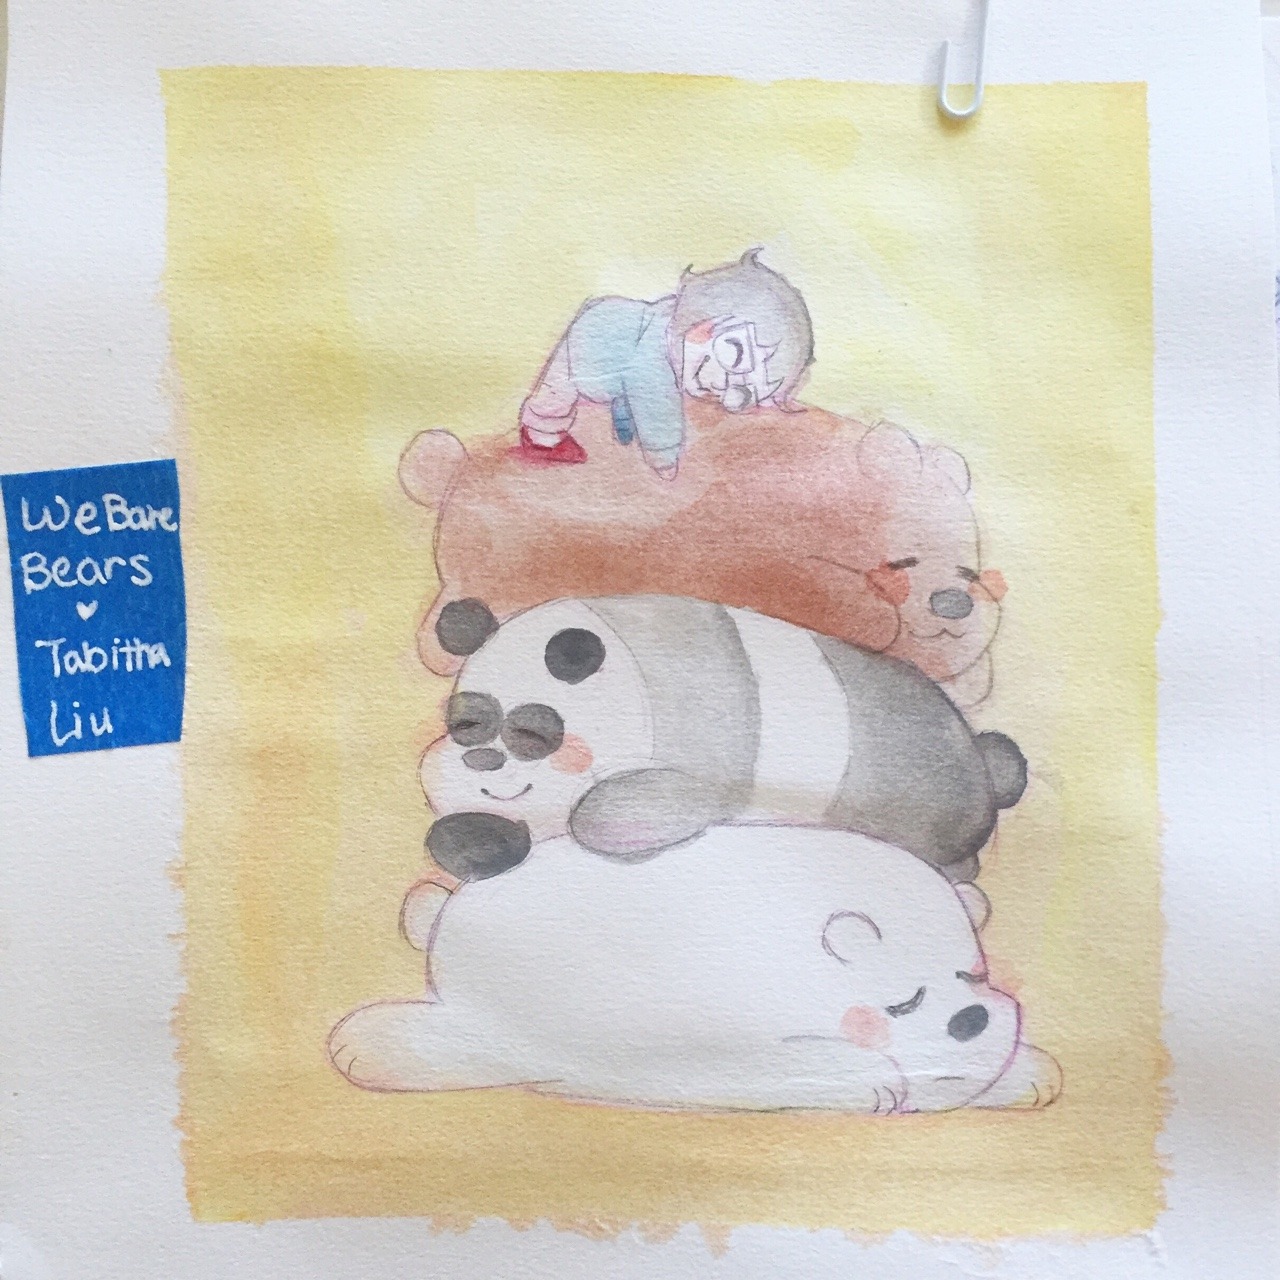 Here it is, the watercolor bearstack I’m so rusty at painting, I haven’t painted since high school. I’m just glad watercolor let’s me fix mistakes. - Tooby -w-